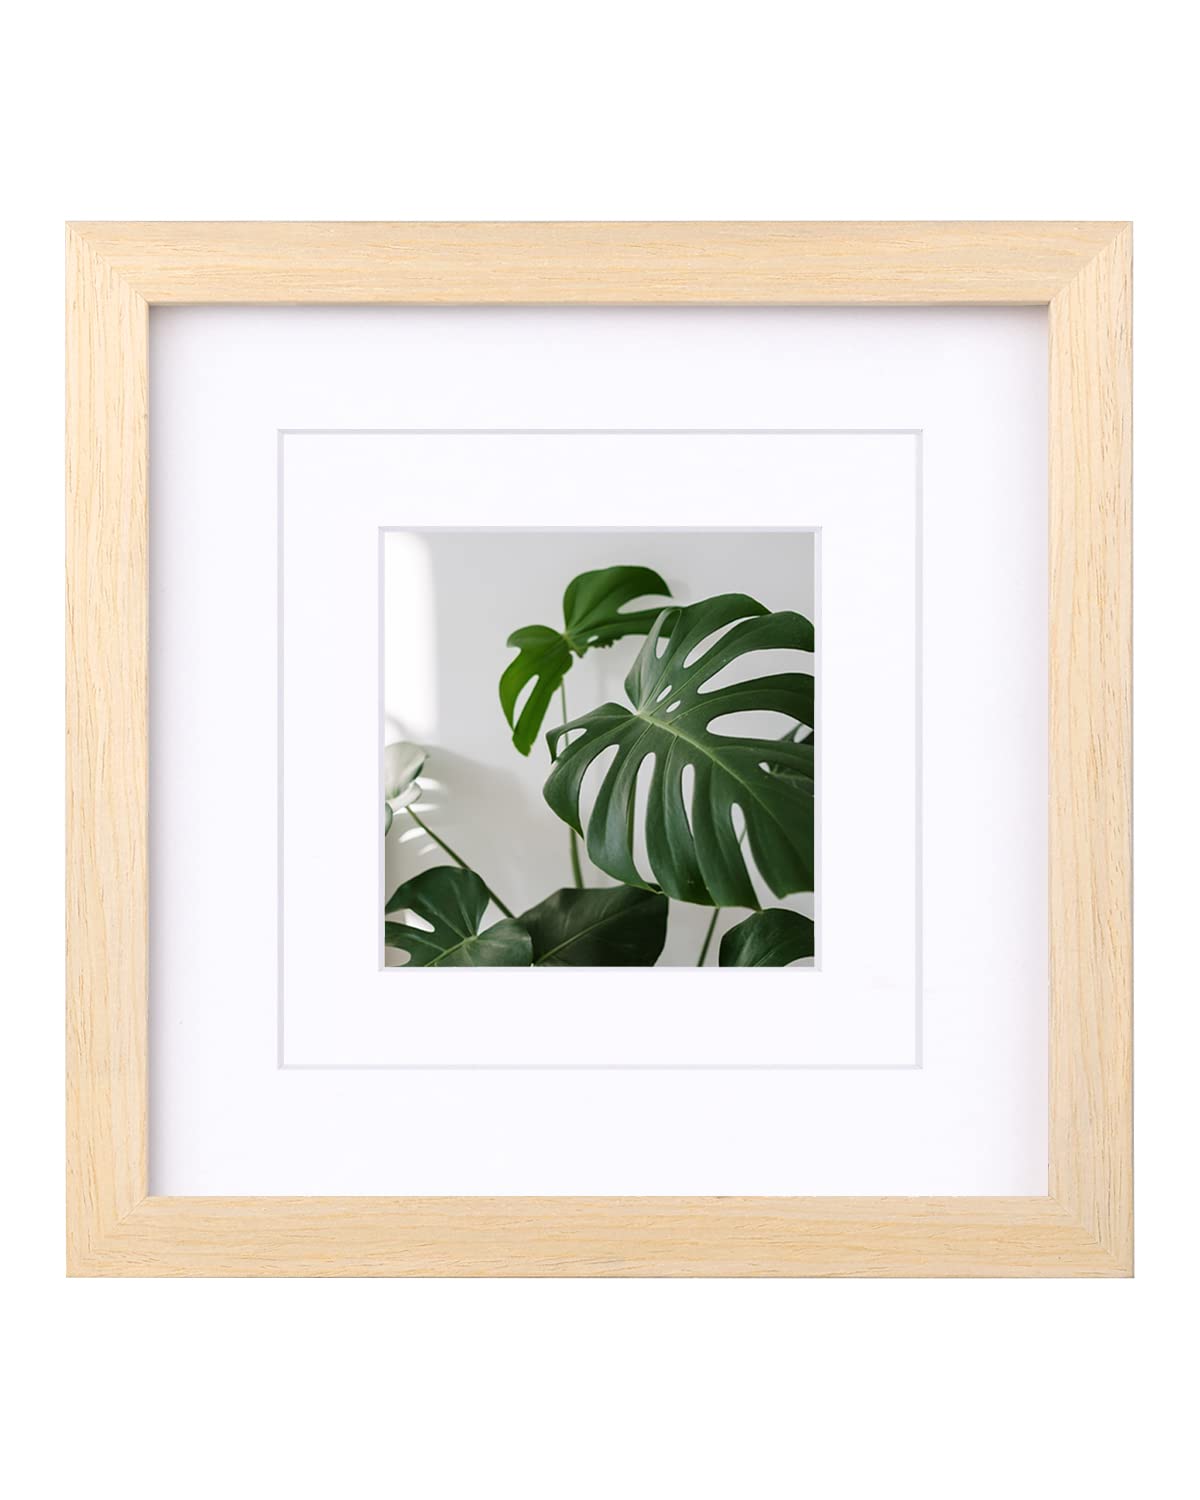 Egofine 8x8 Picture Frame Made of Solid Wood with Plexiglass